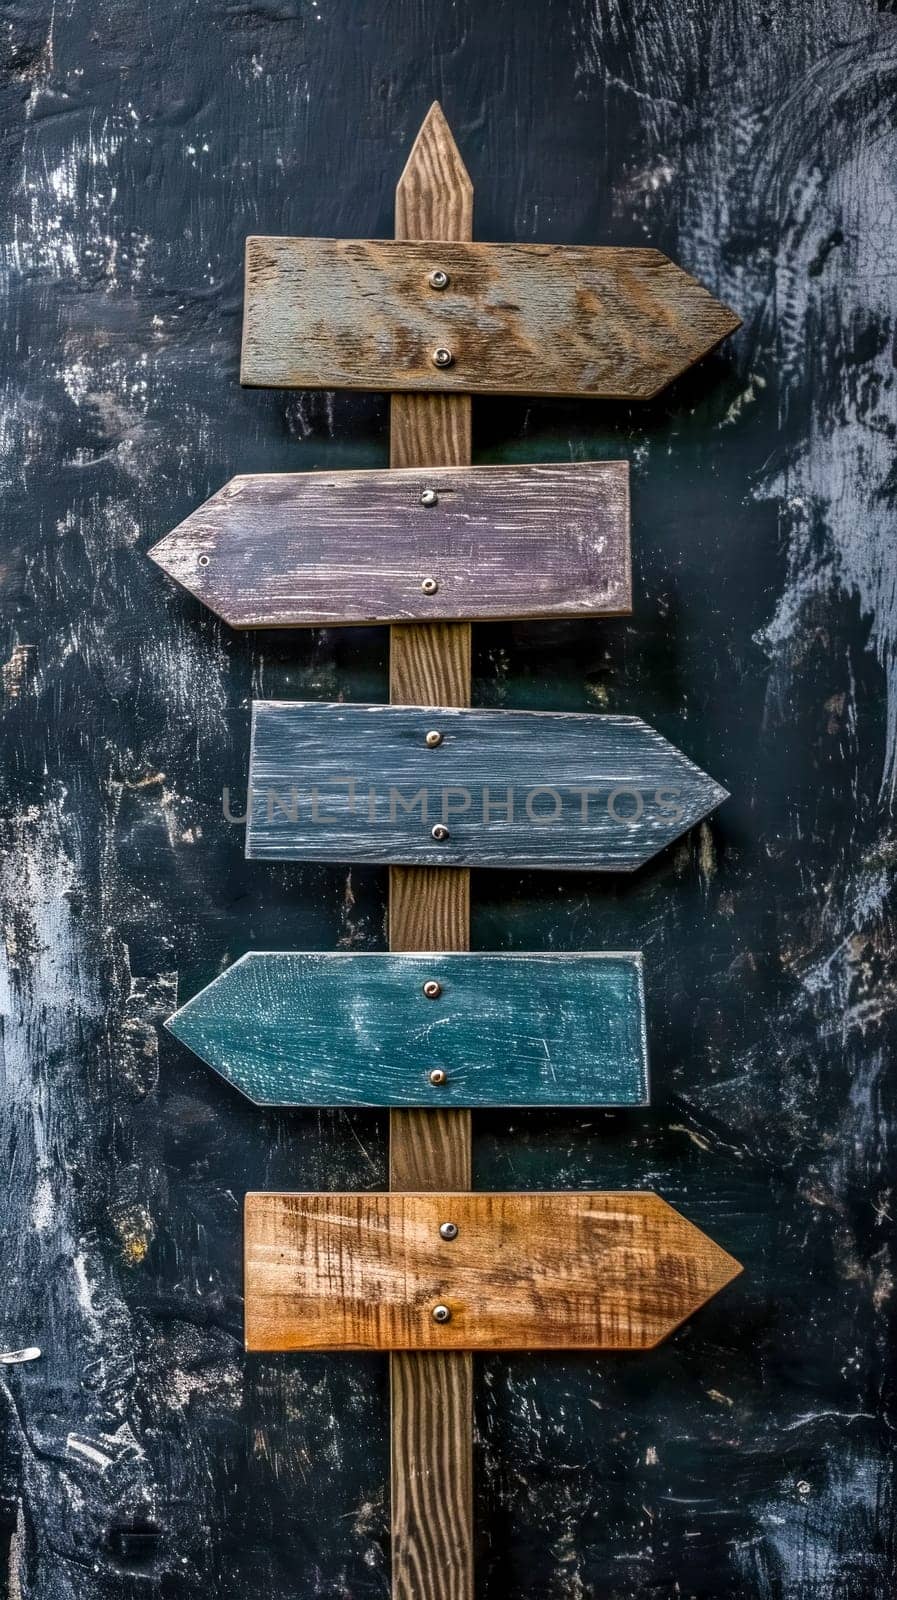 Wooden directional sign with multiple arrows pointing in different directions on a grunge black background. by Edophoto